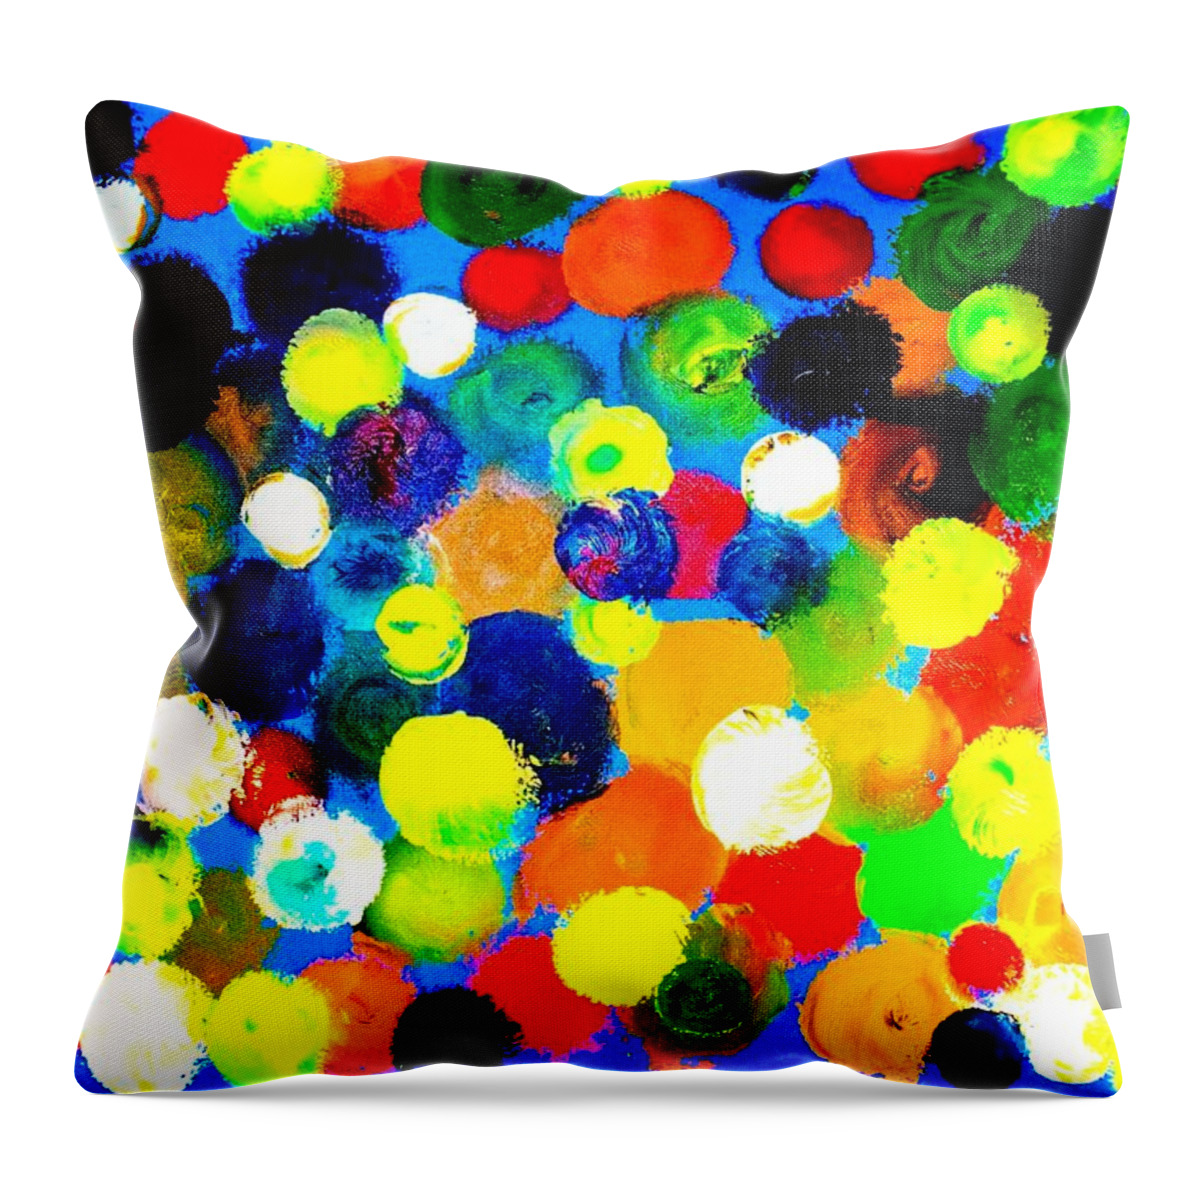 Contemparary Throw Pillow featuring the painting Illusion by Piety Dsilva